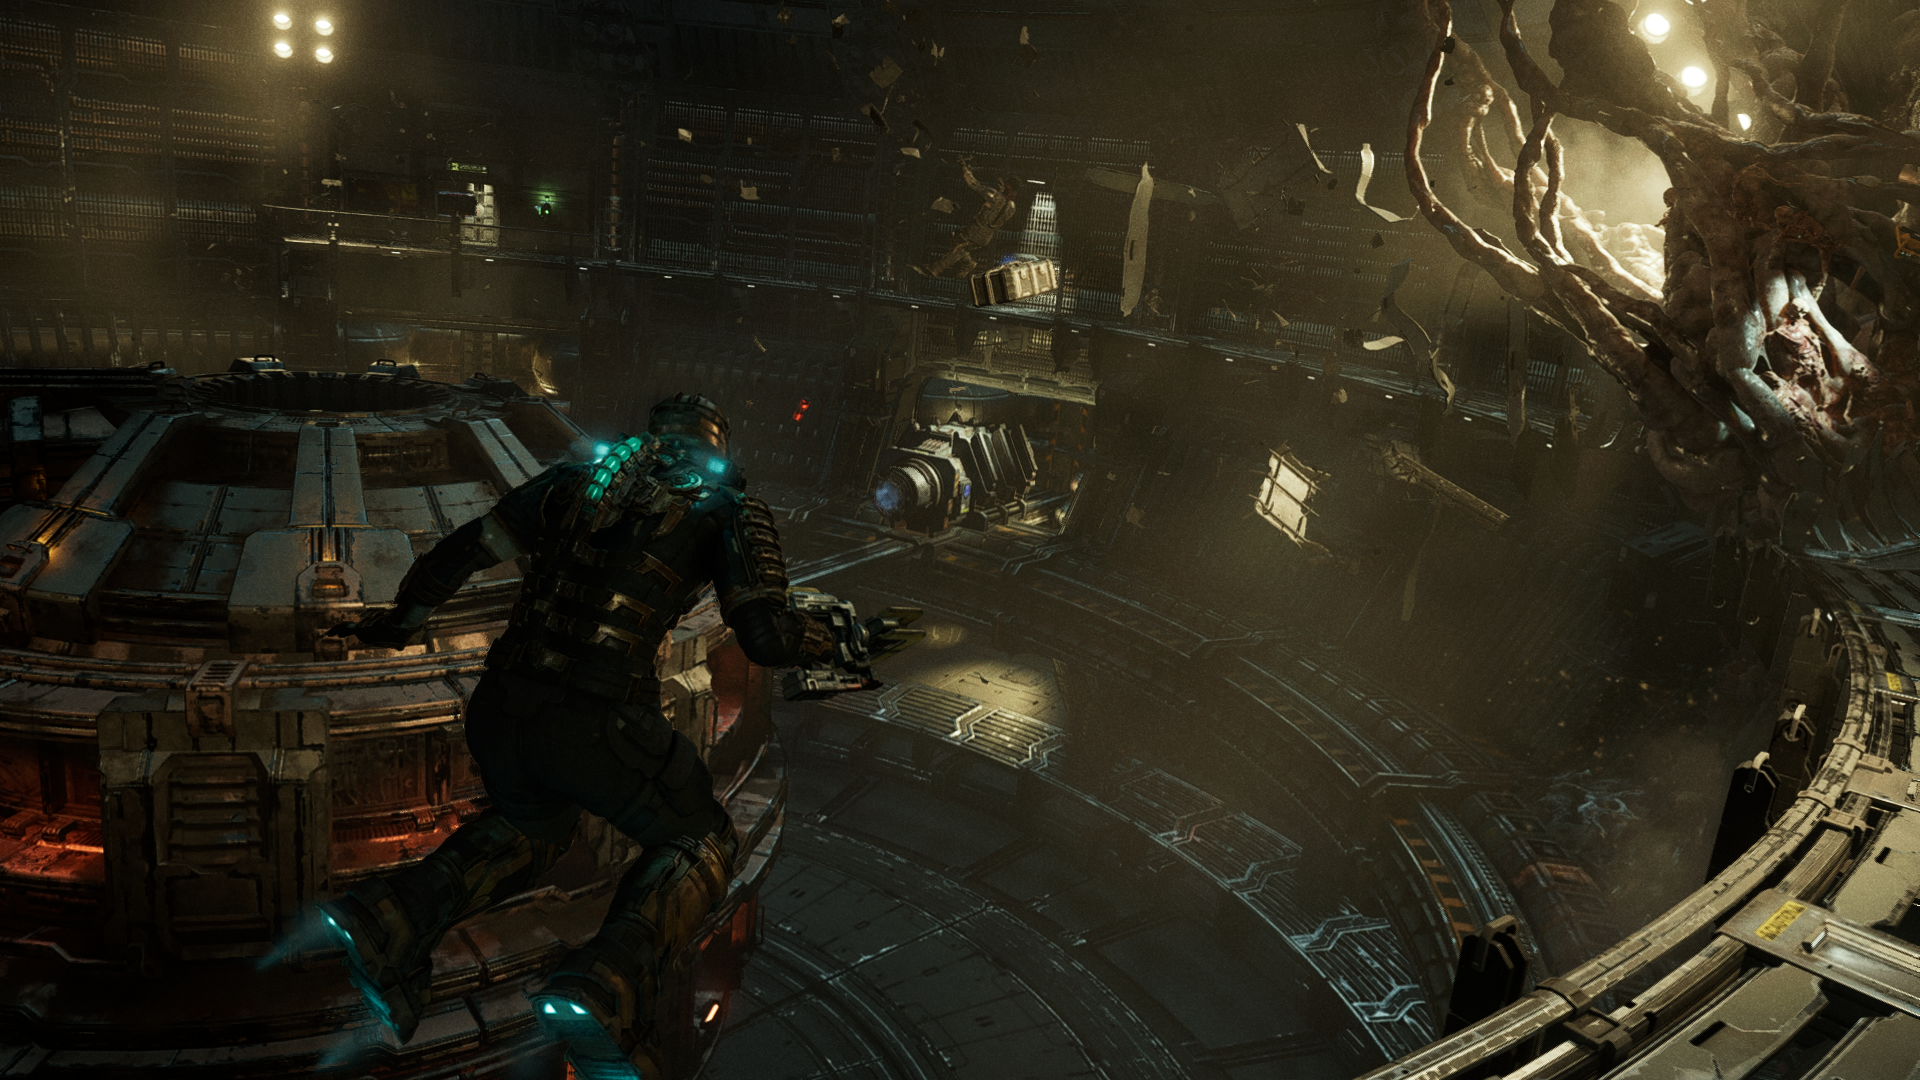 Isaac floats through a decimated room in Dead Space.